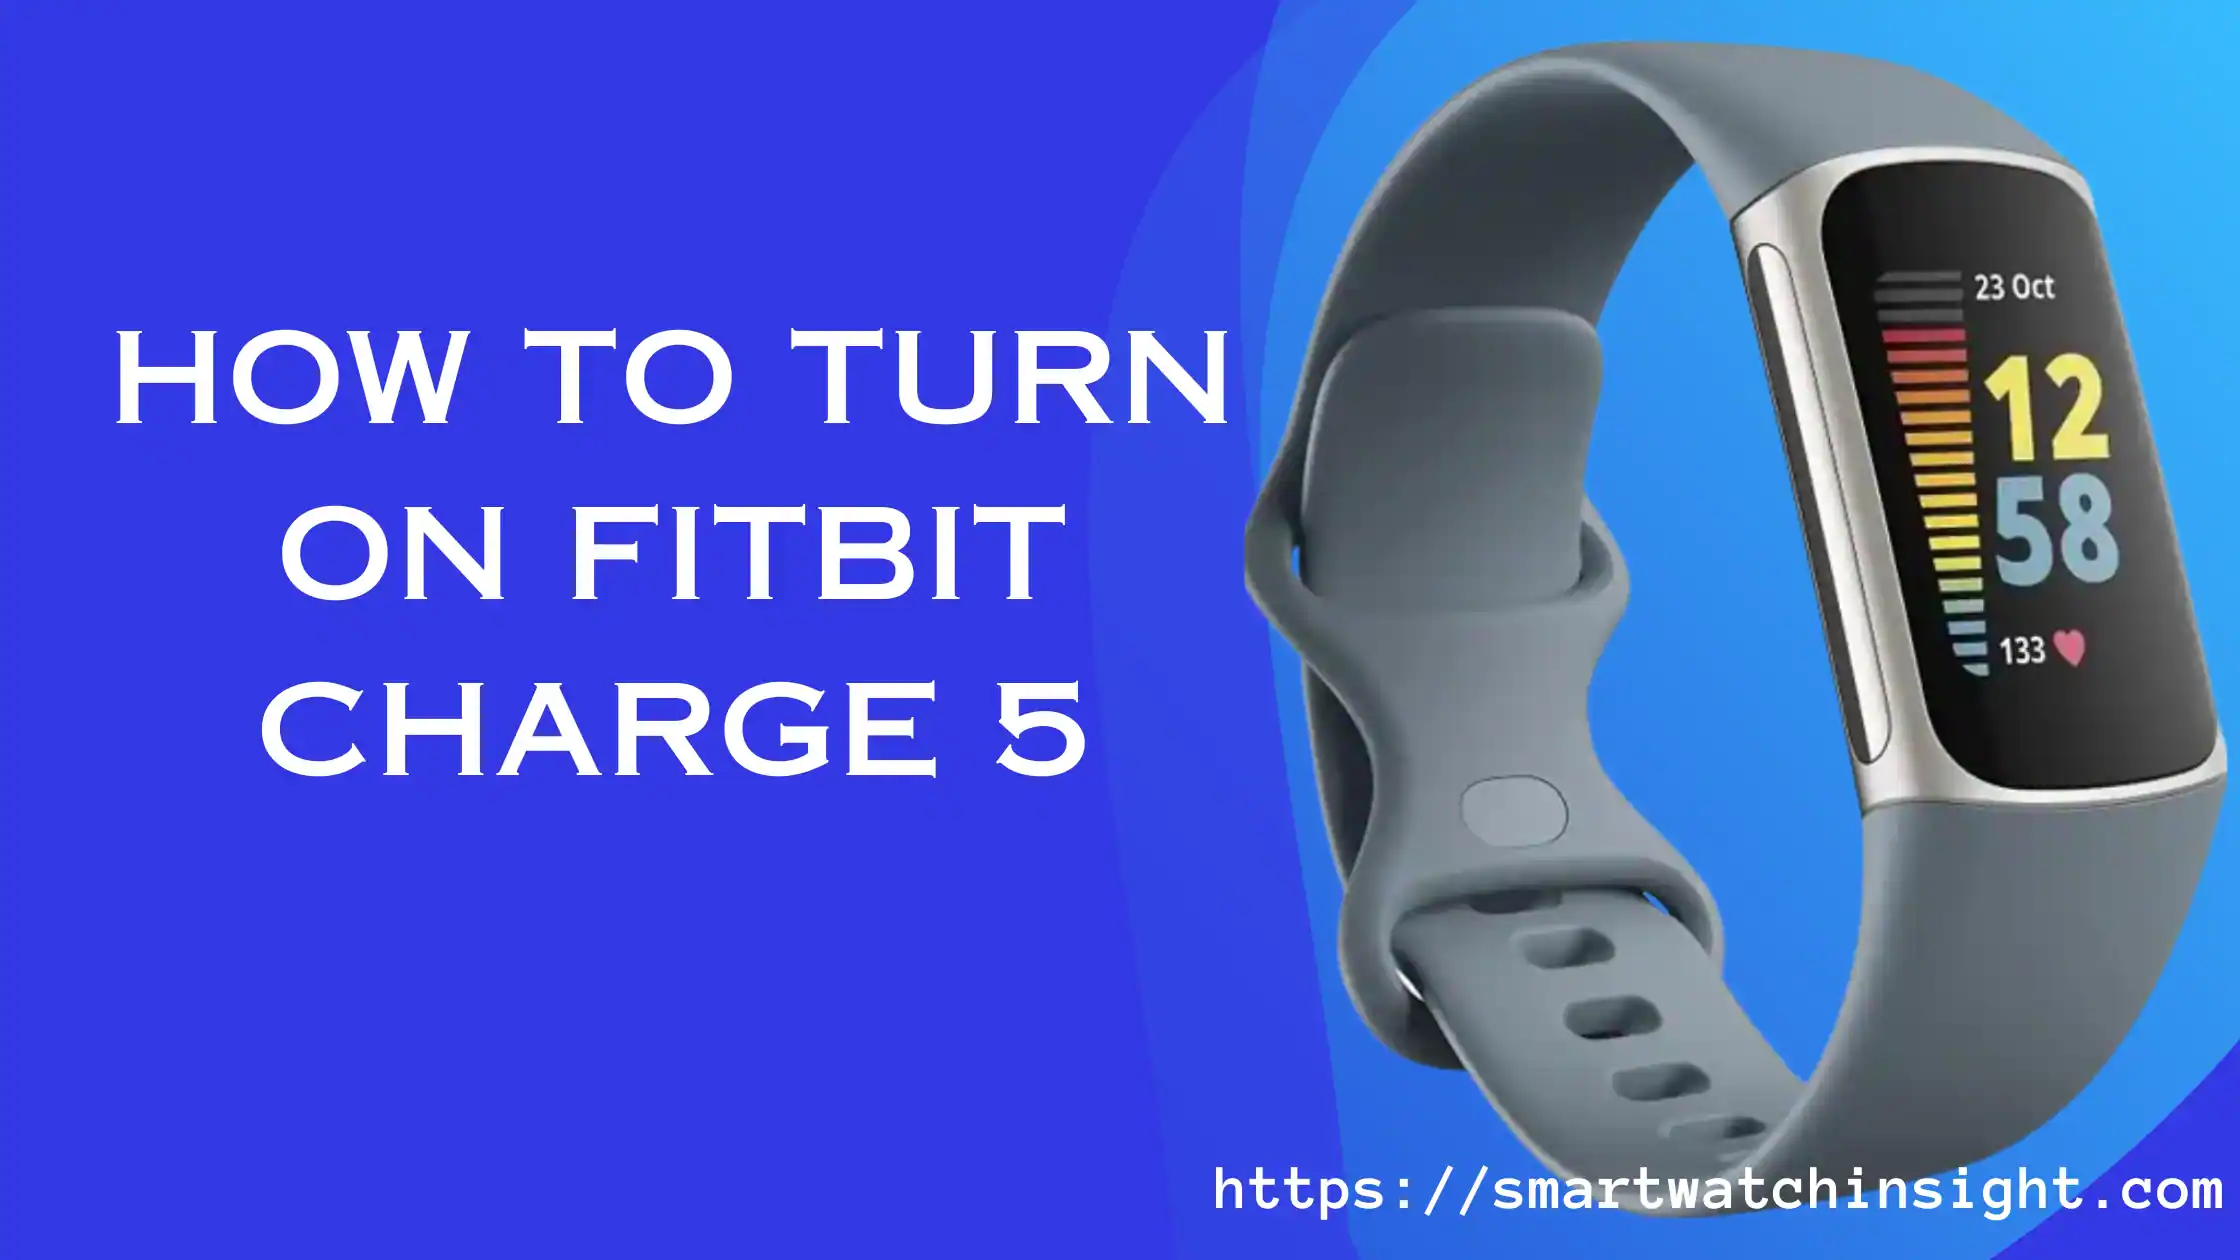 How to Turn on Fitbit Charge 5